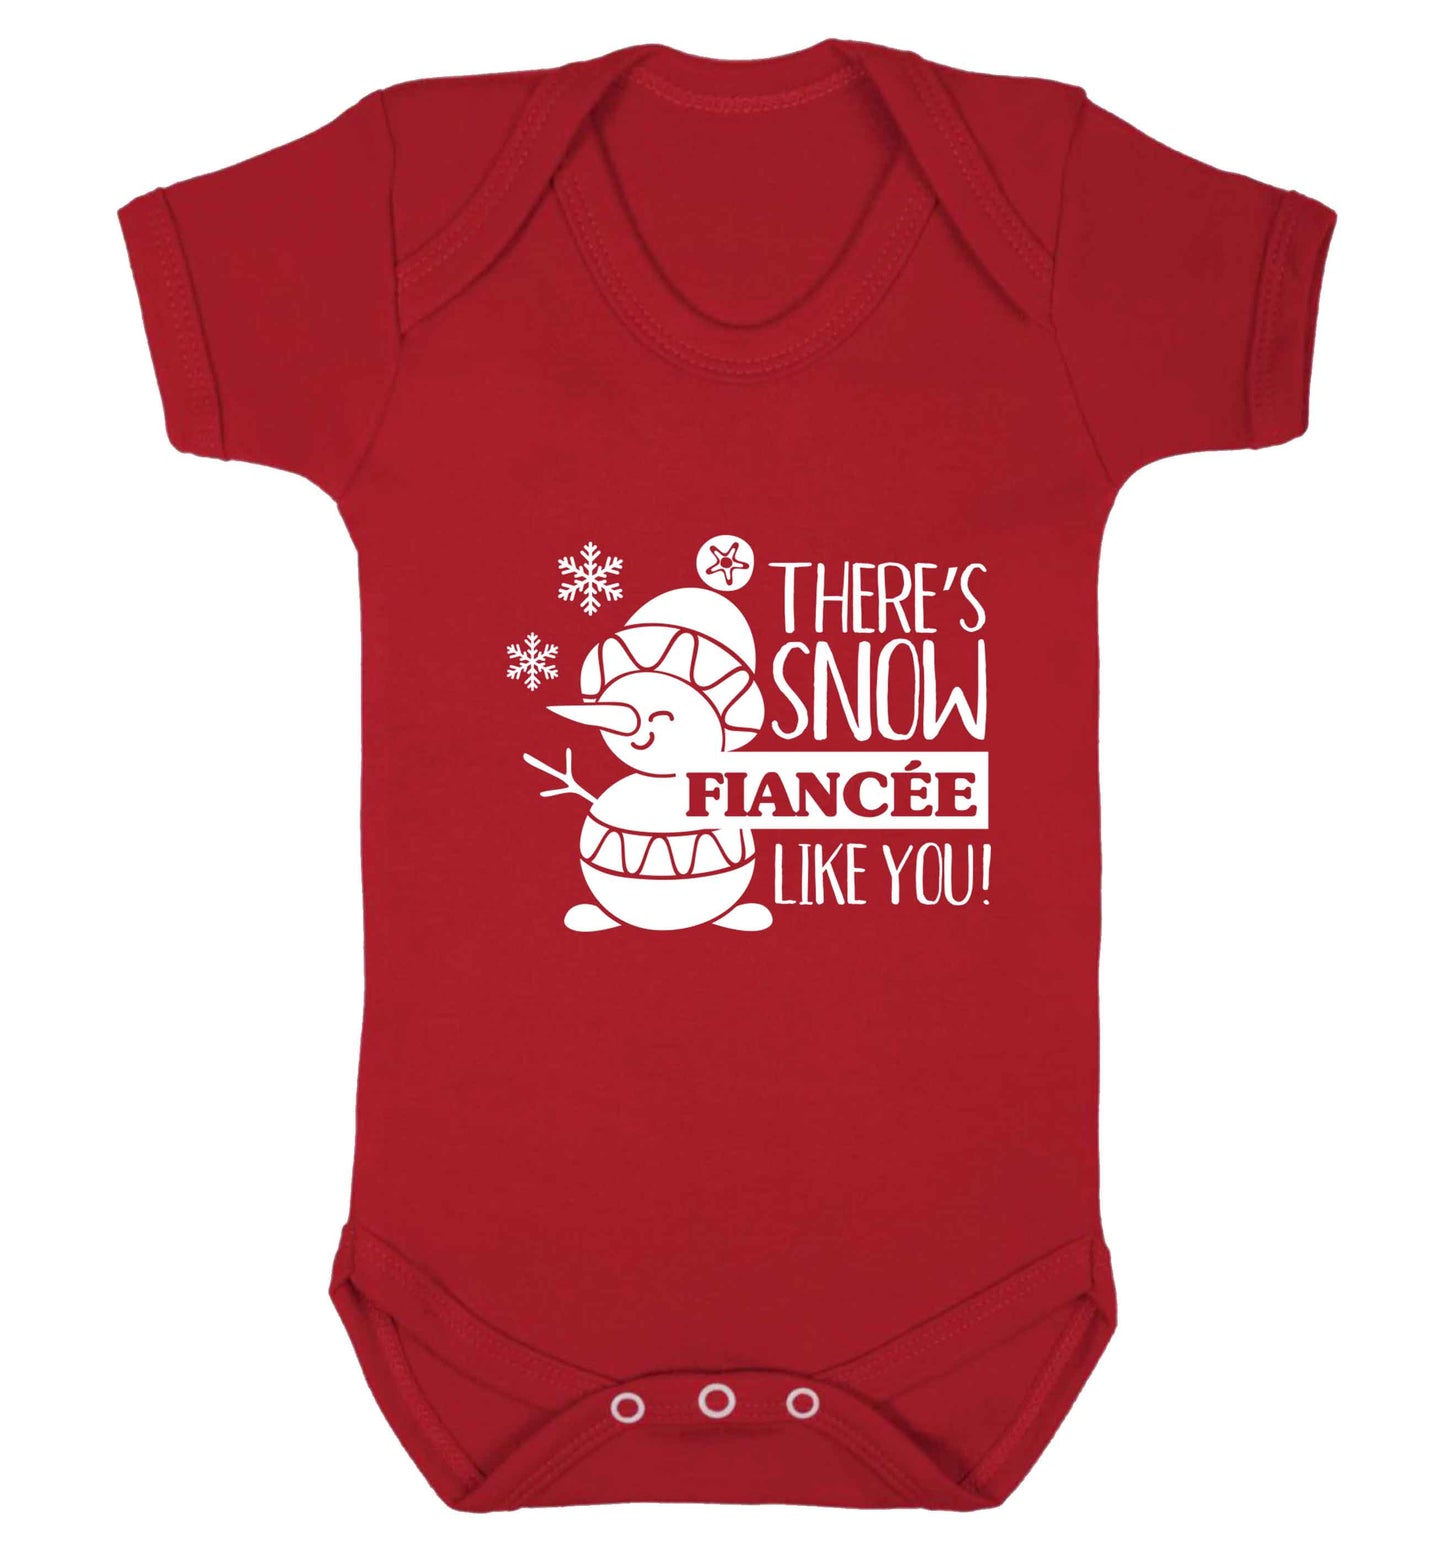 There's snow fiancee like you baby vest red 18-24 months